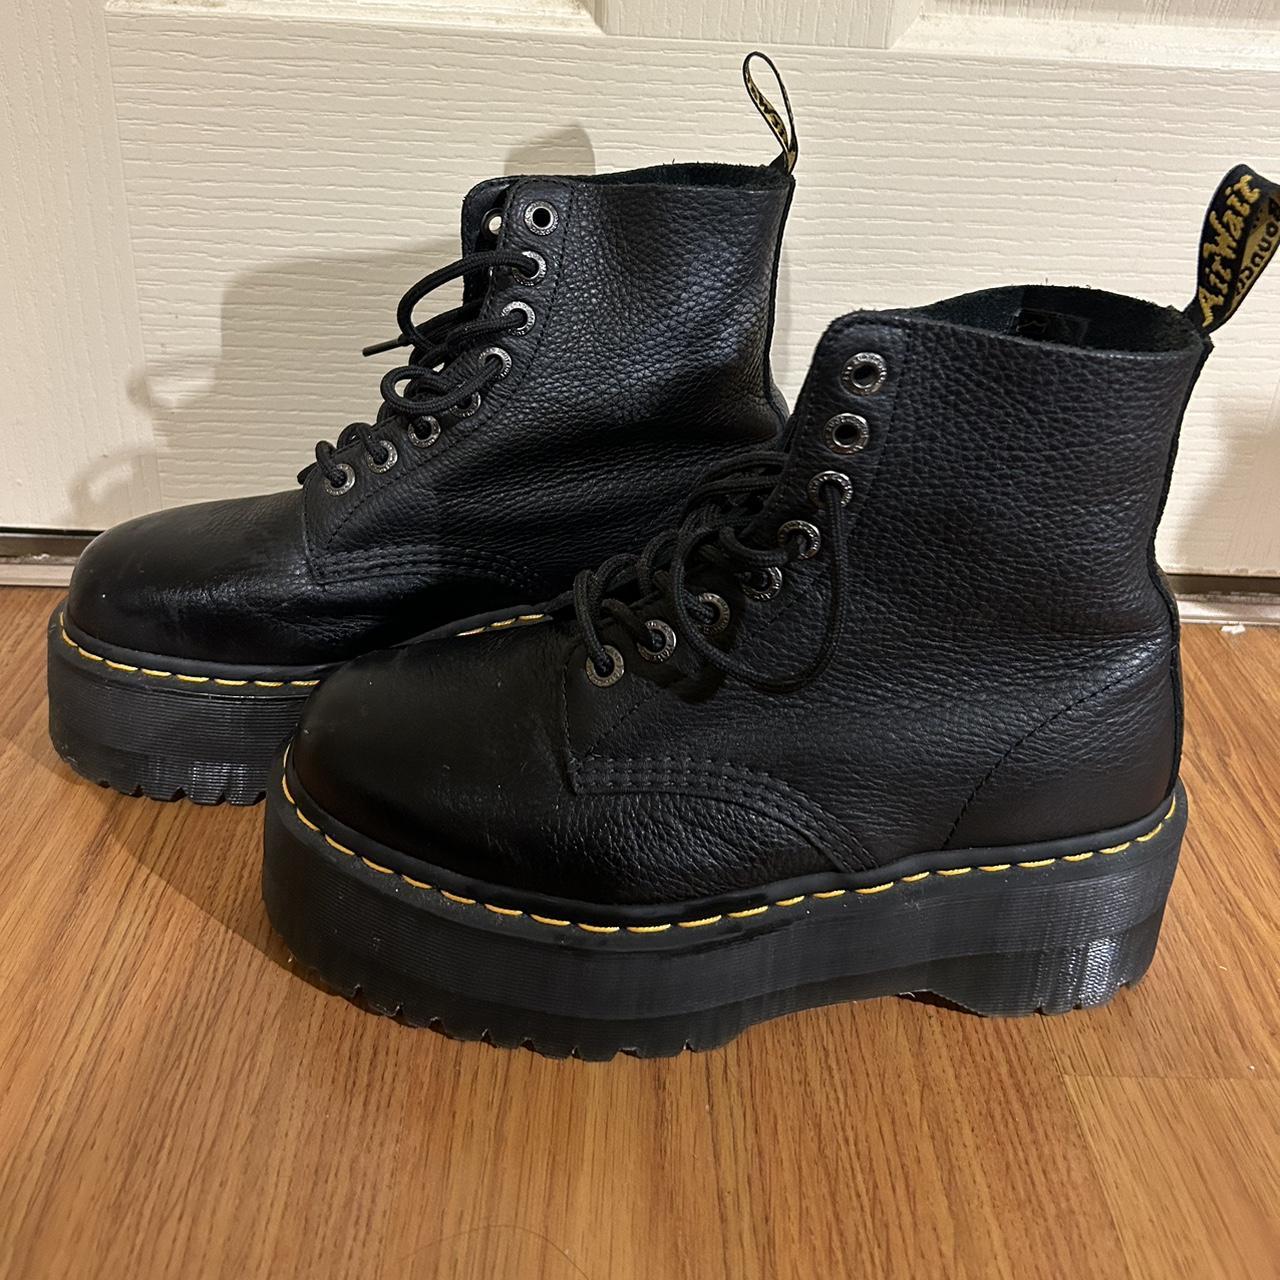 1460 PASCAL MAX BOOT Originally purchased for... - Depop